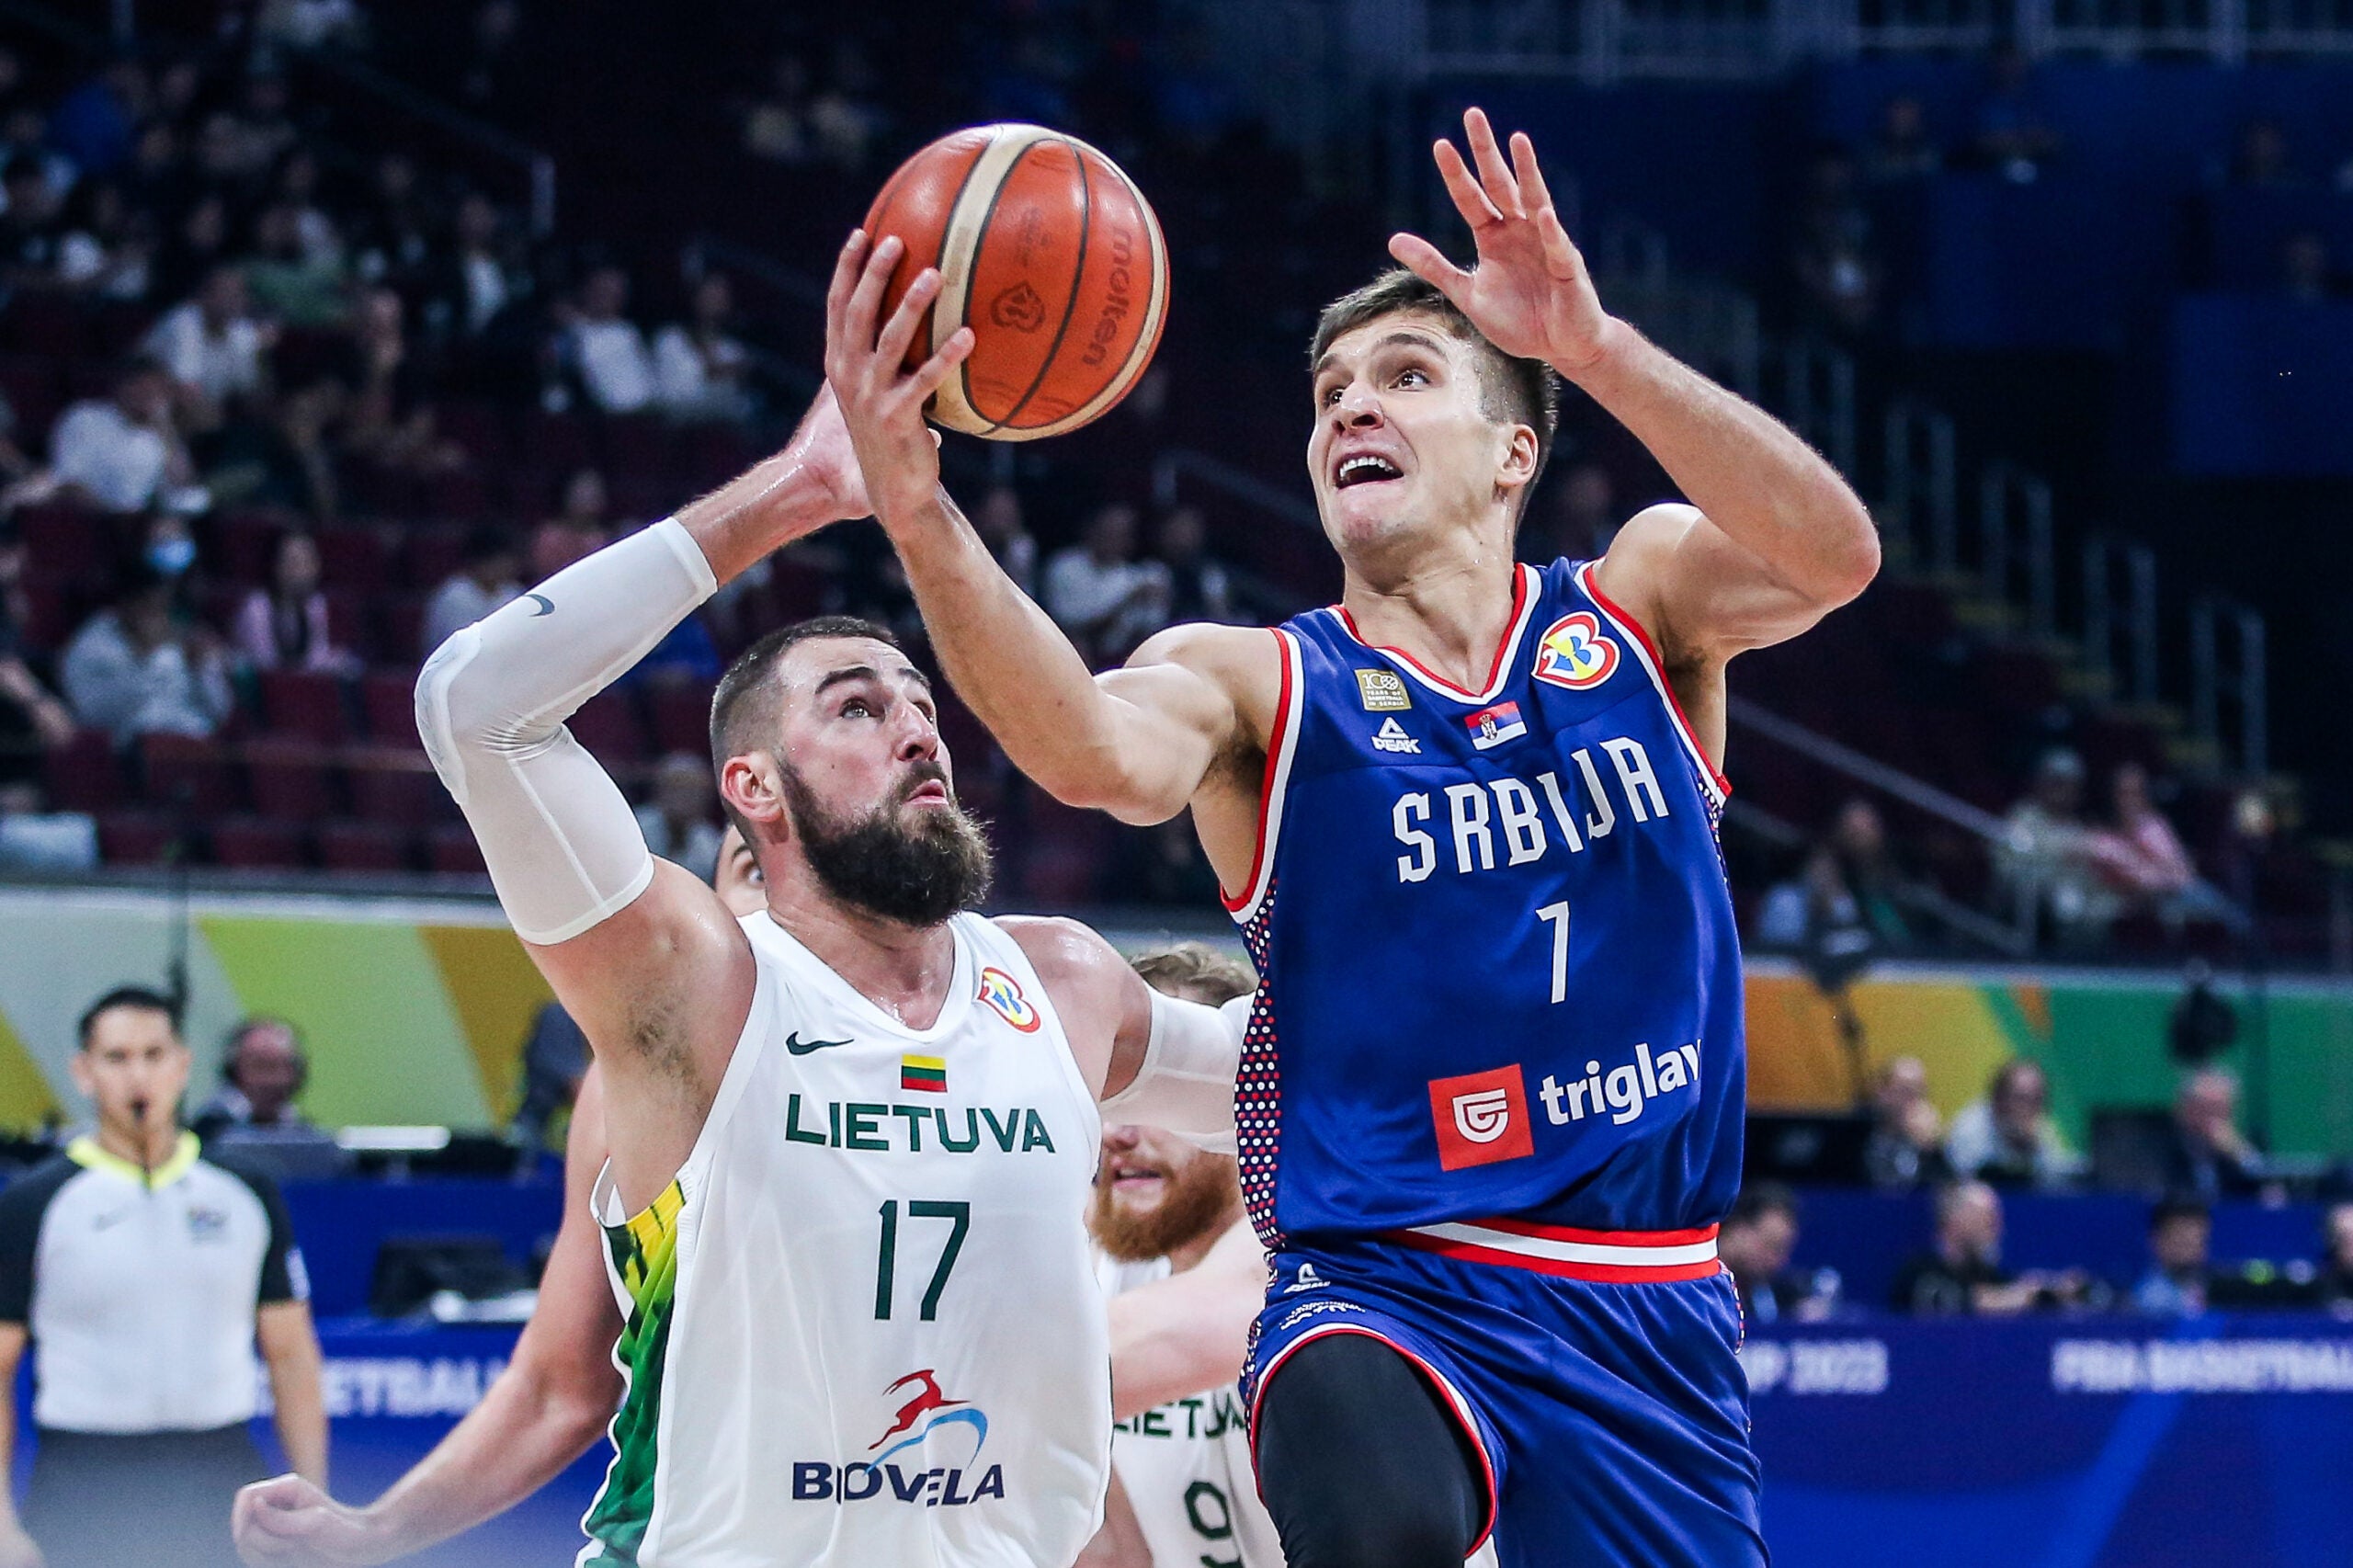 Serbia Booked the First Ticket to the Semifinals After a Landslide Victory Against Lithuania